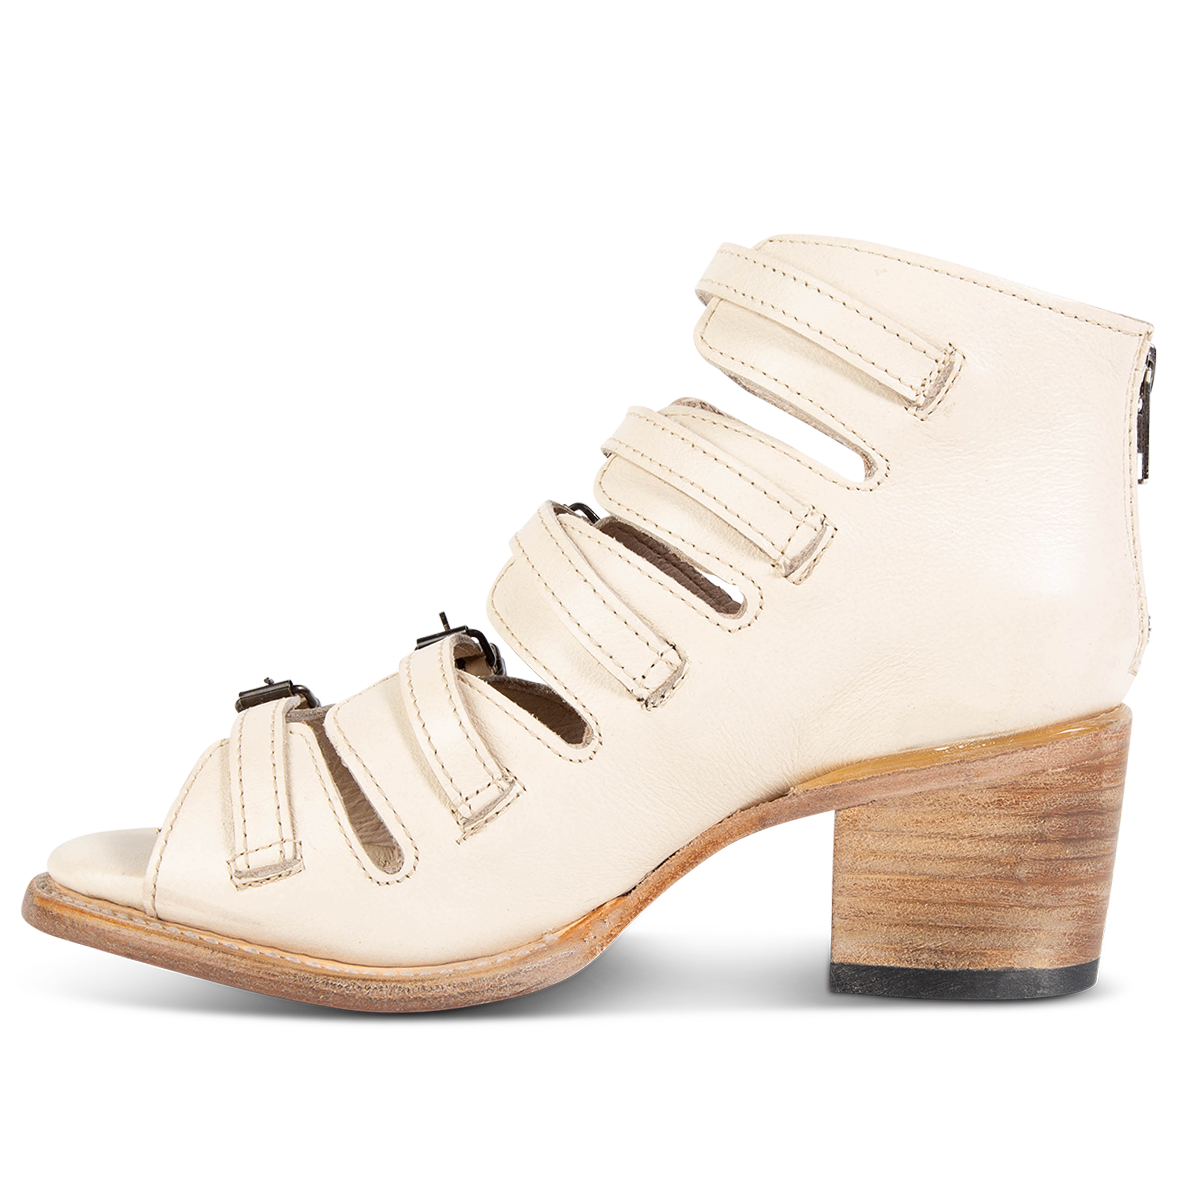 Inside view showing leather straps and stacked heel on FREEBIRD women's Quinn beige sandal